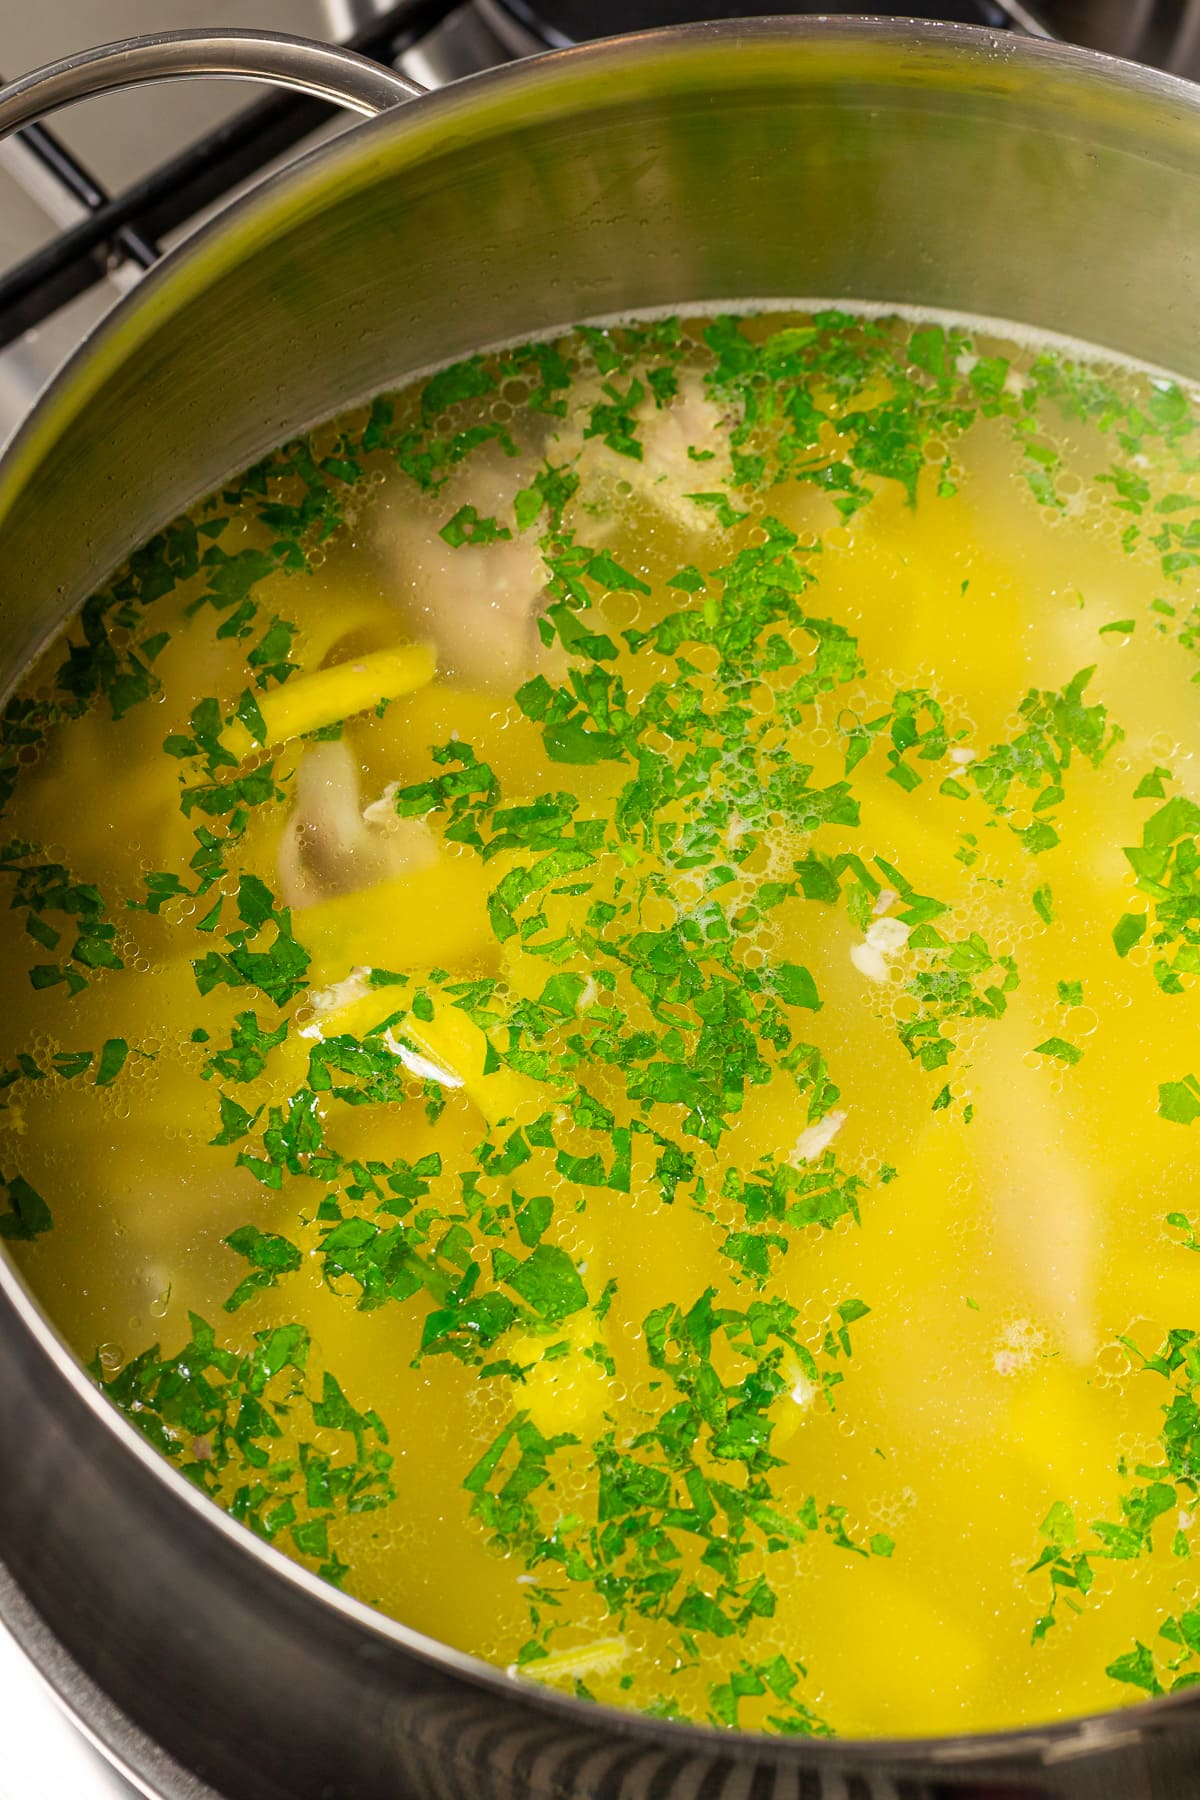 Aluminum pan with chicken noodle soup with chopped parsley.